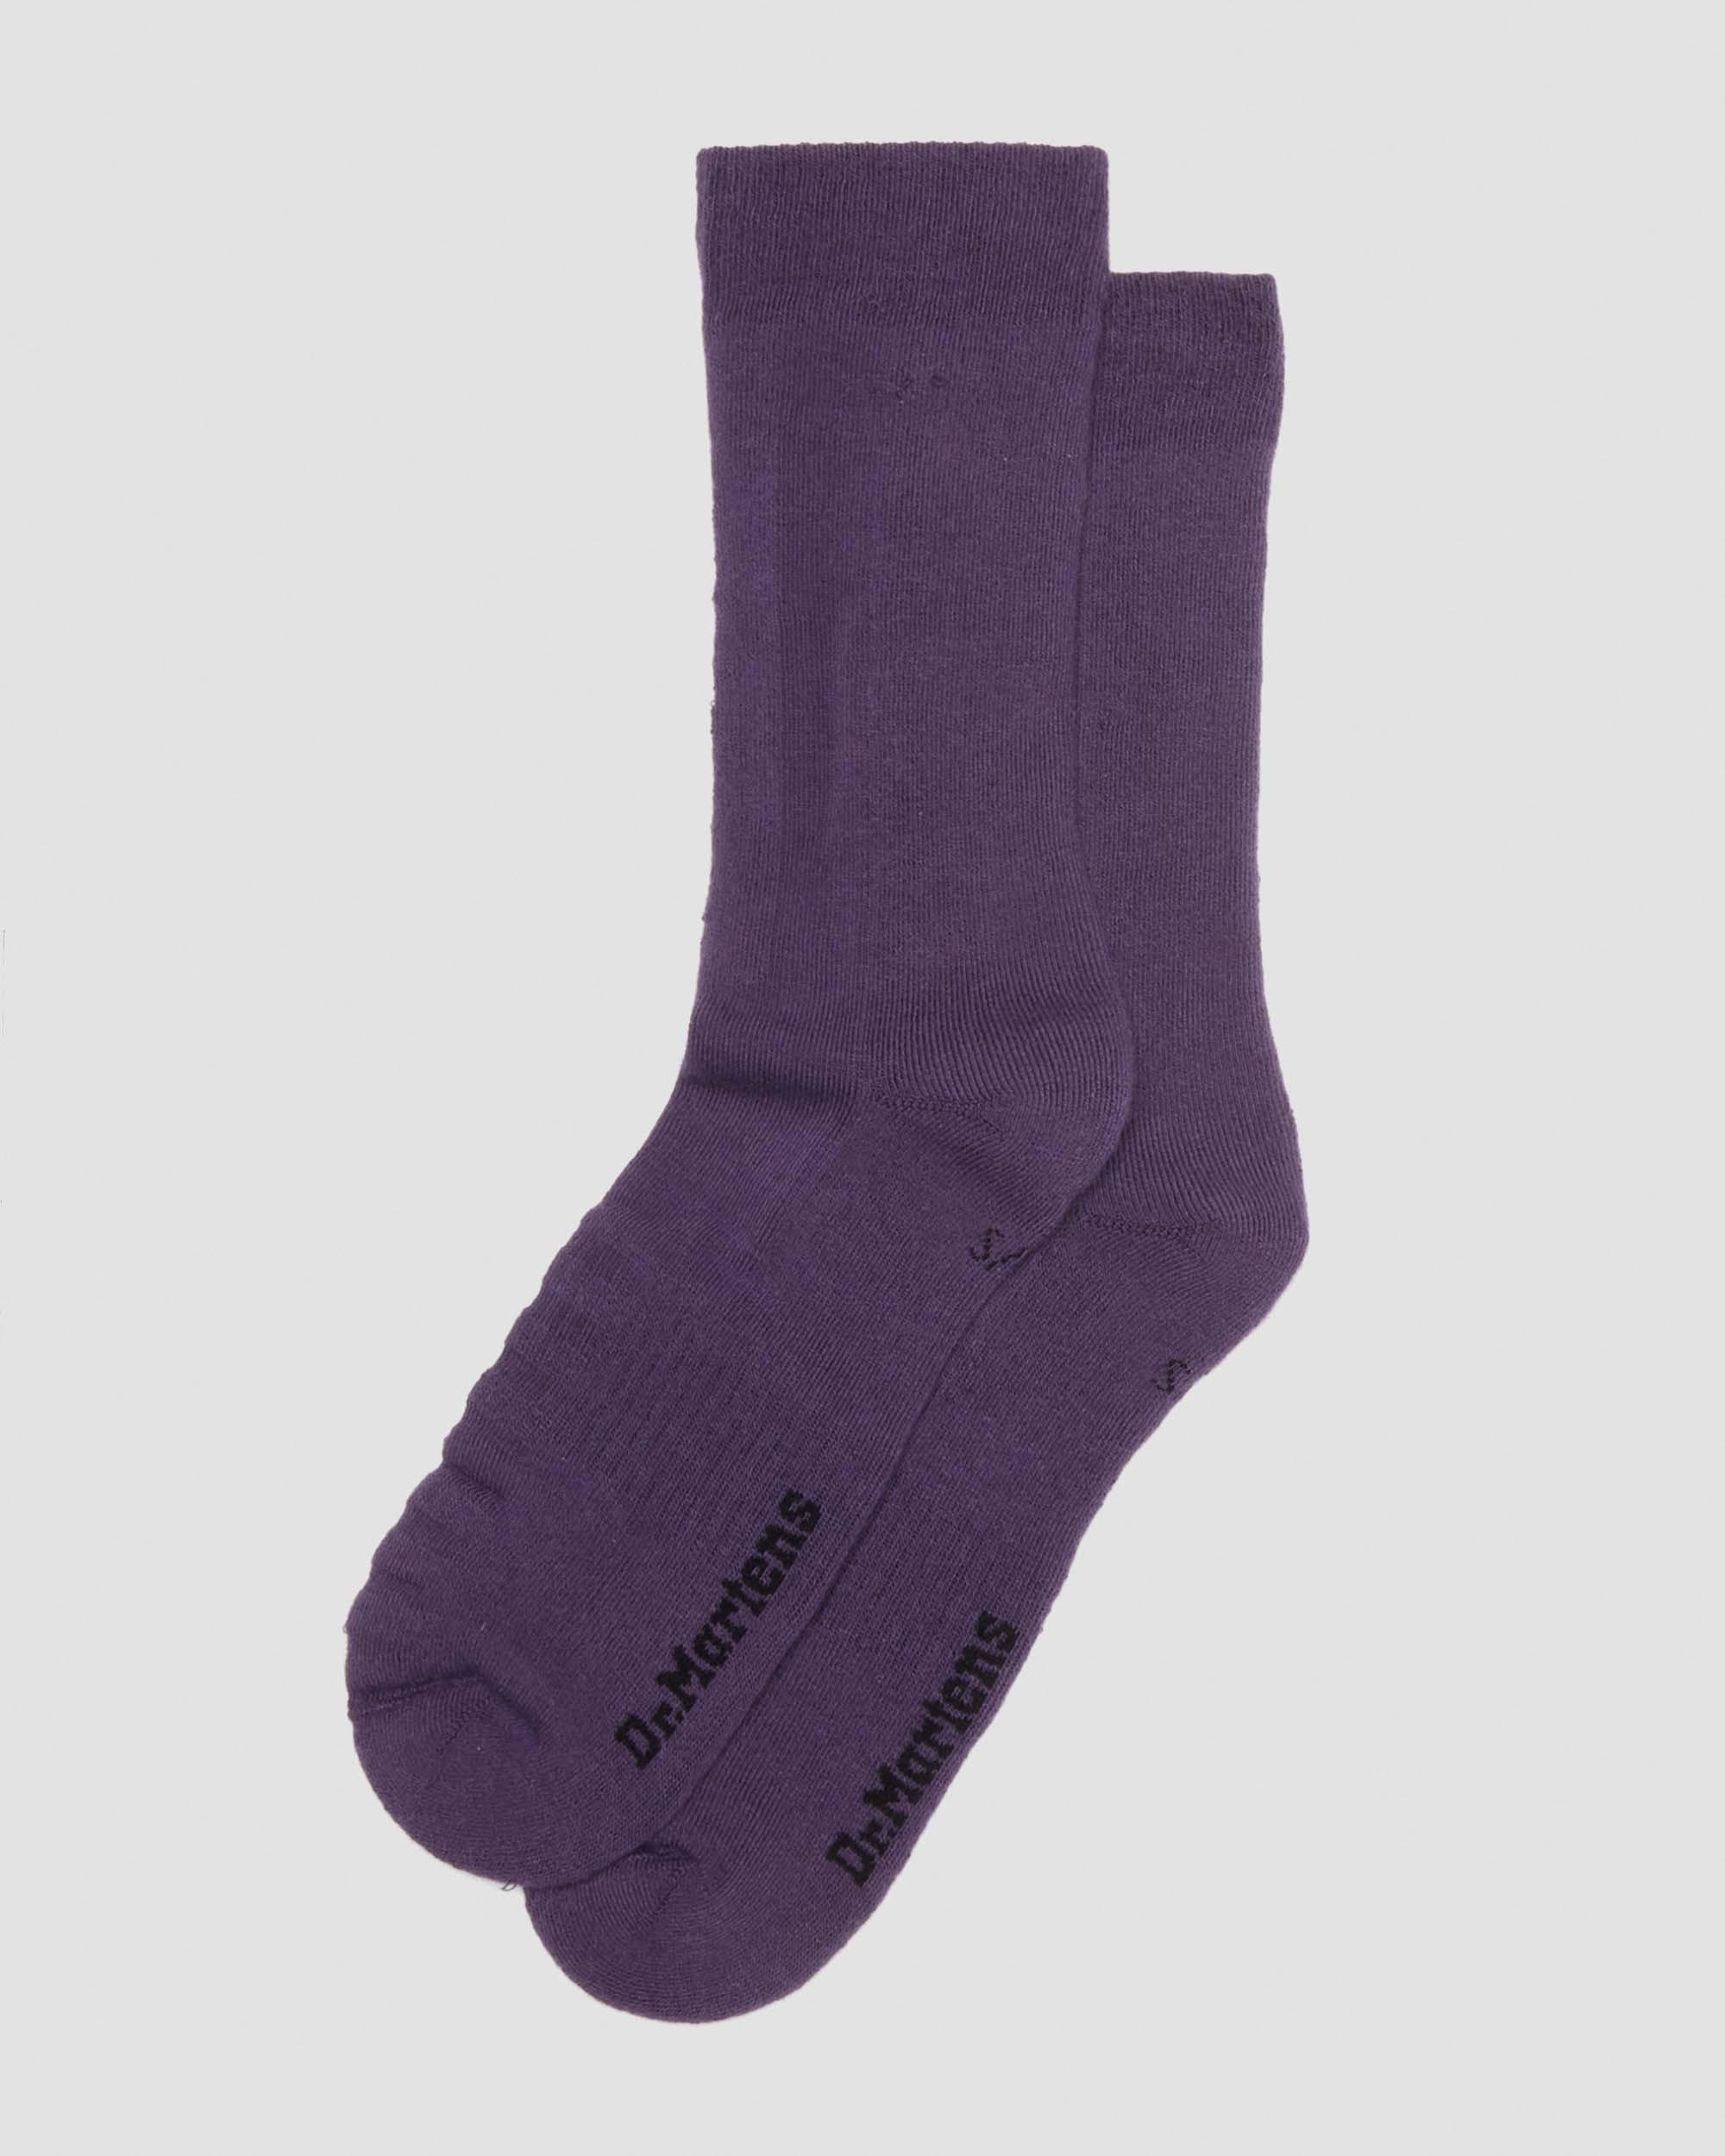 Double Doc Cotton Blend Socks in Charcoal